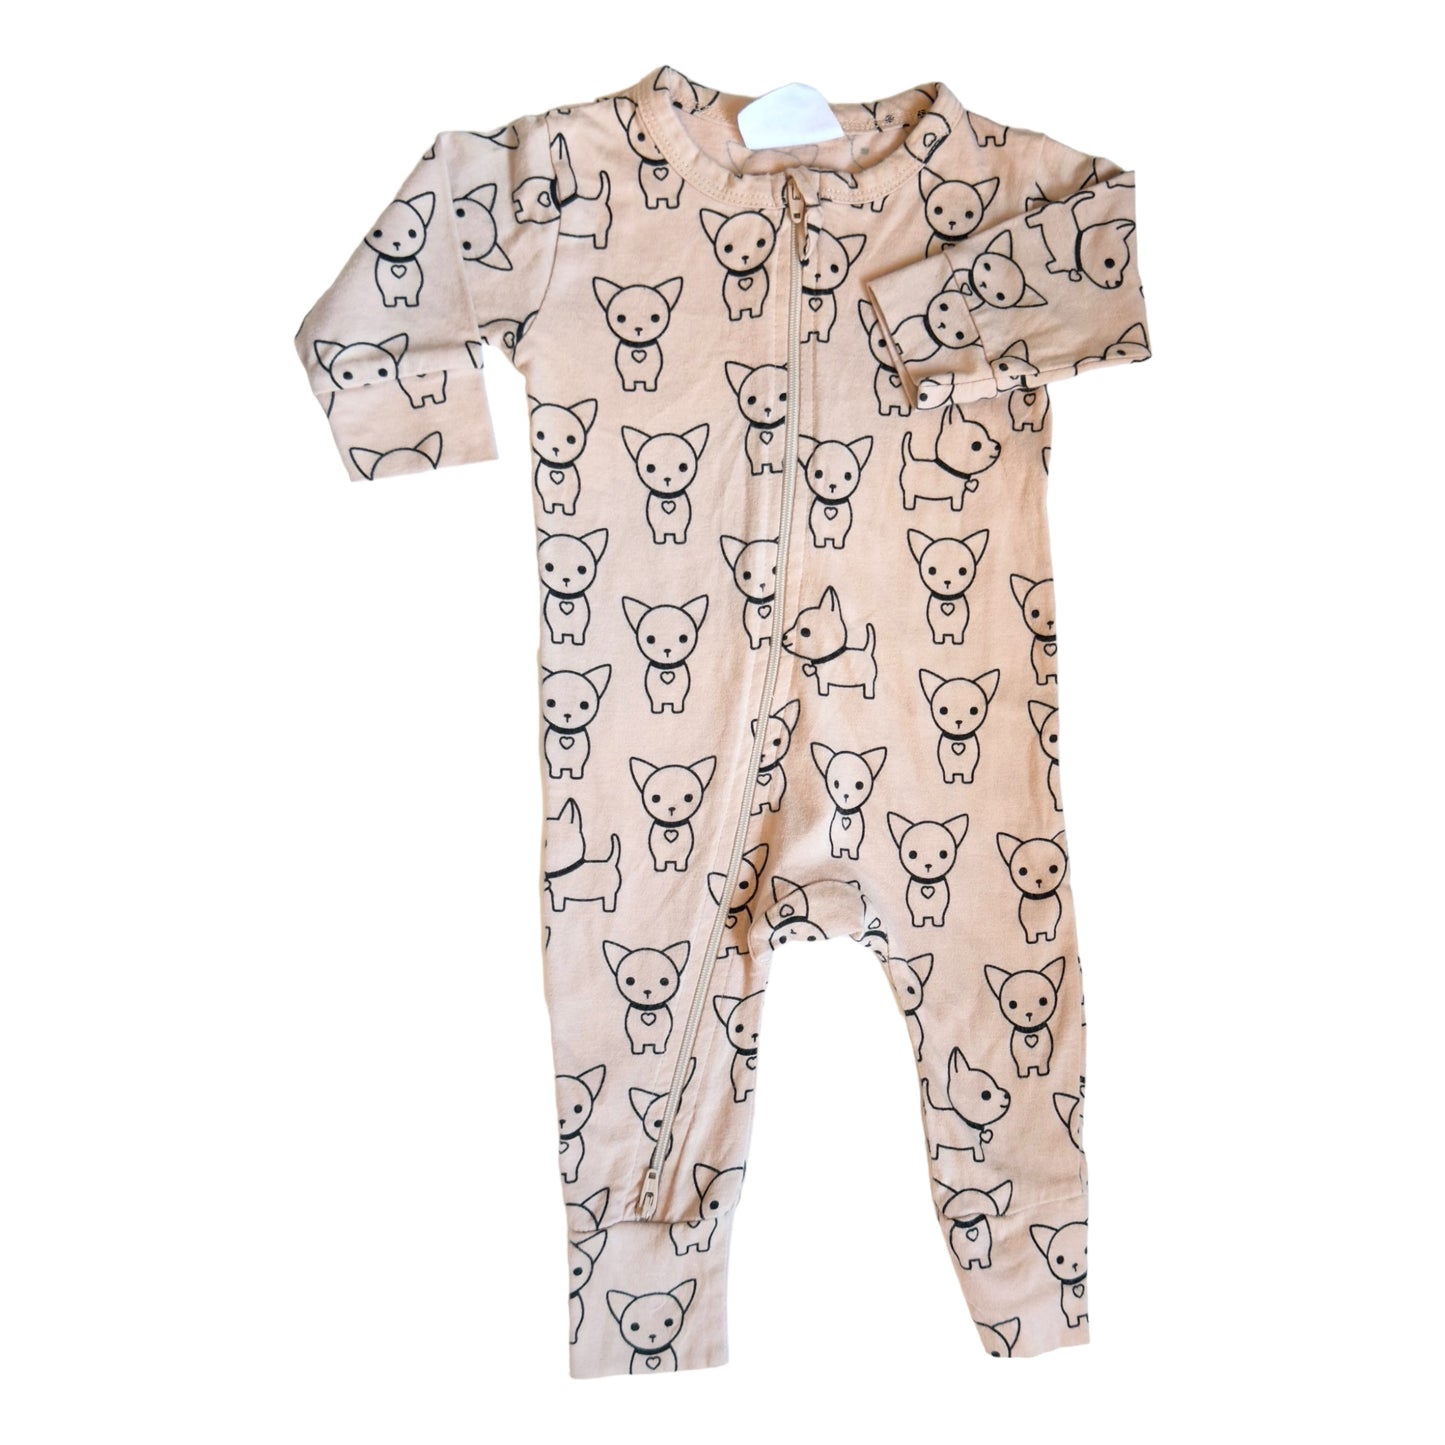 HUX baby growsuit | 0-6 months | EUC | pink with cats | organic cotton